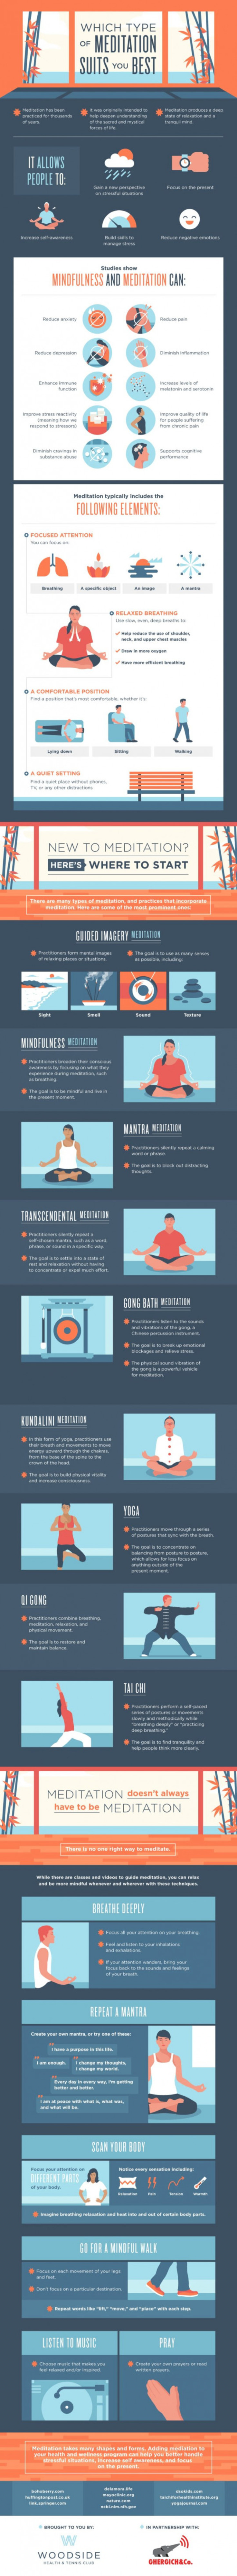 Which Type of Meditation Suits You Best?